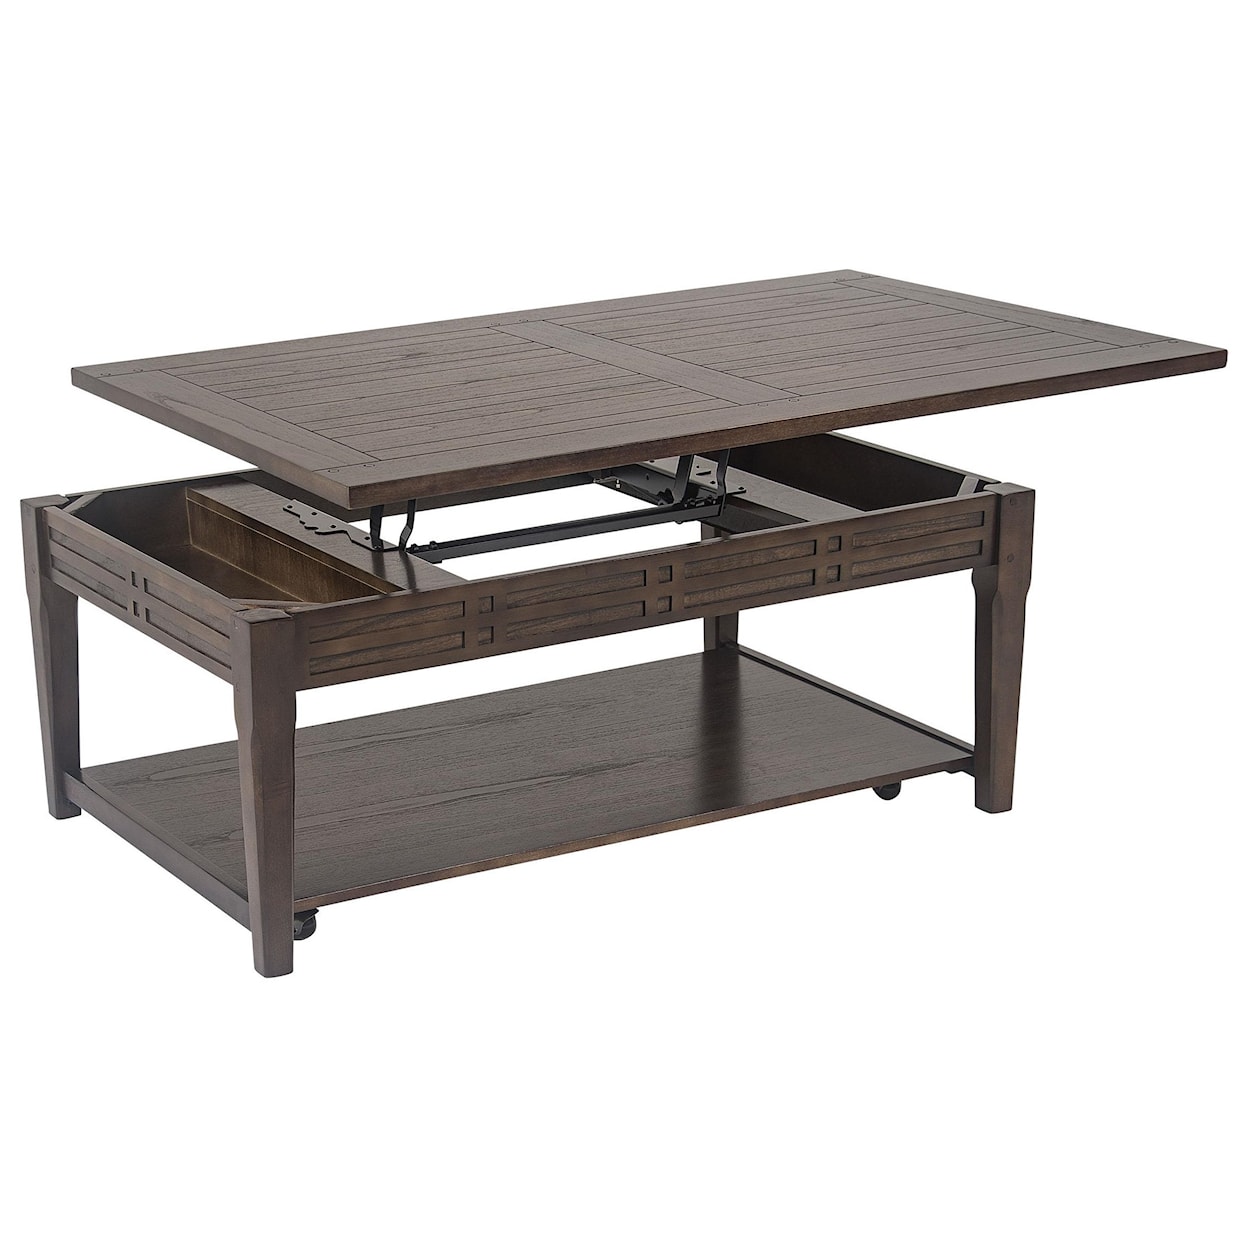 Steve Silver Crestline Lift Top Cocktail Table with Casters